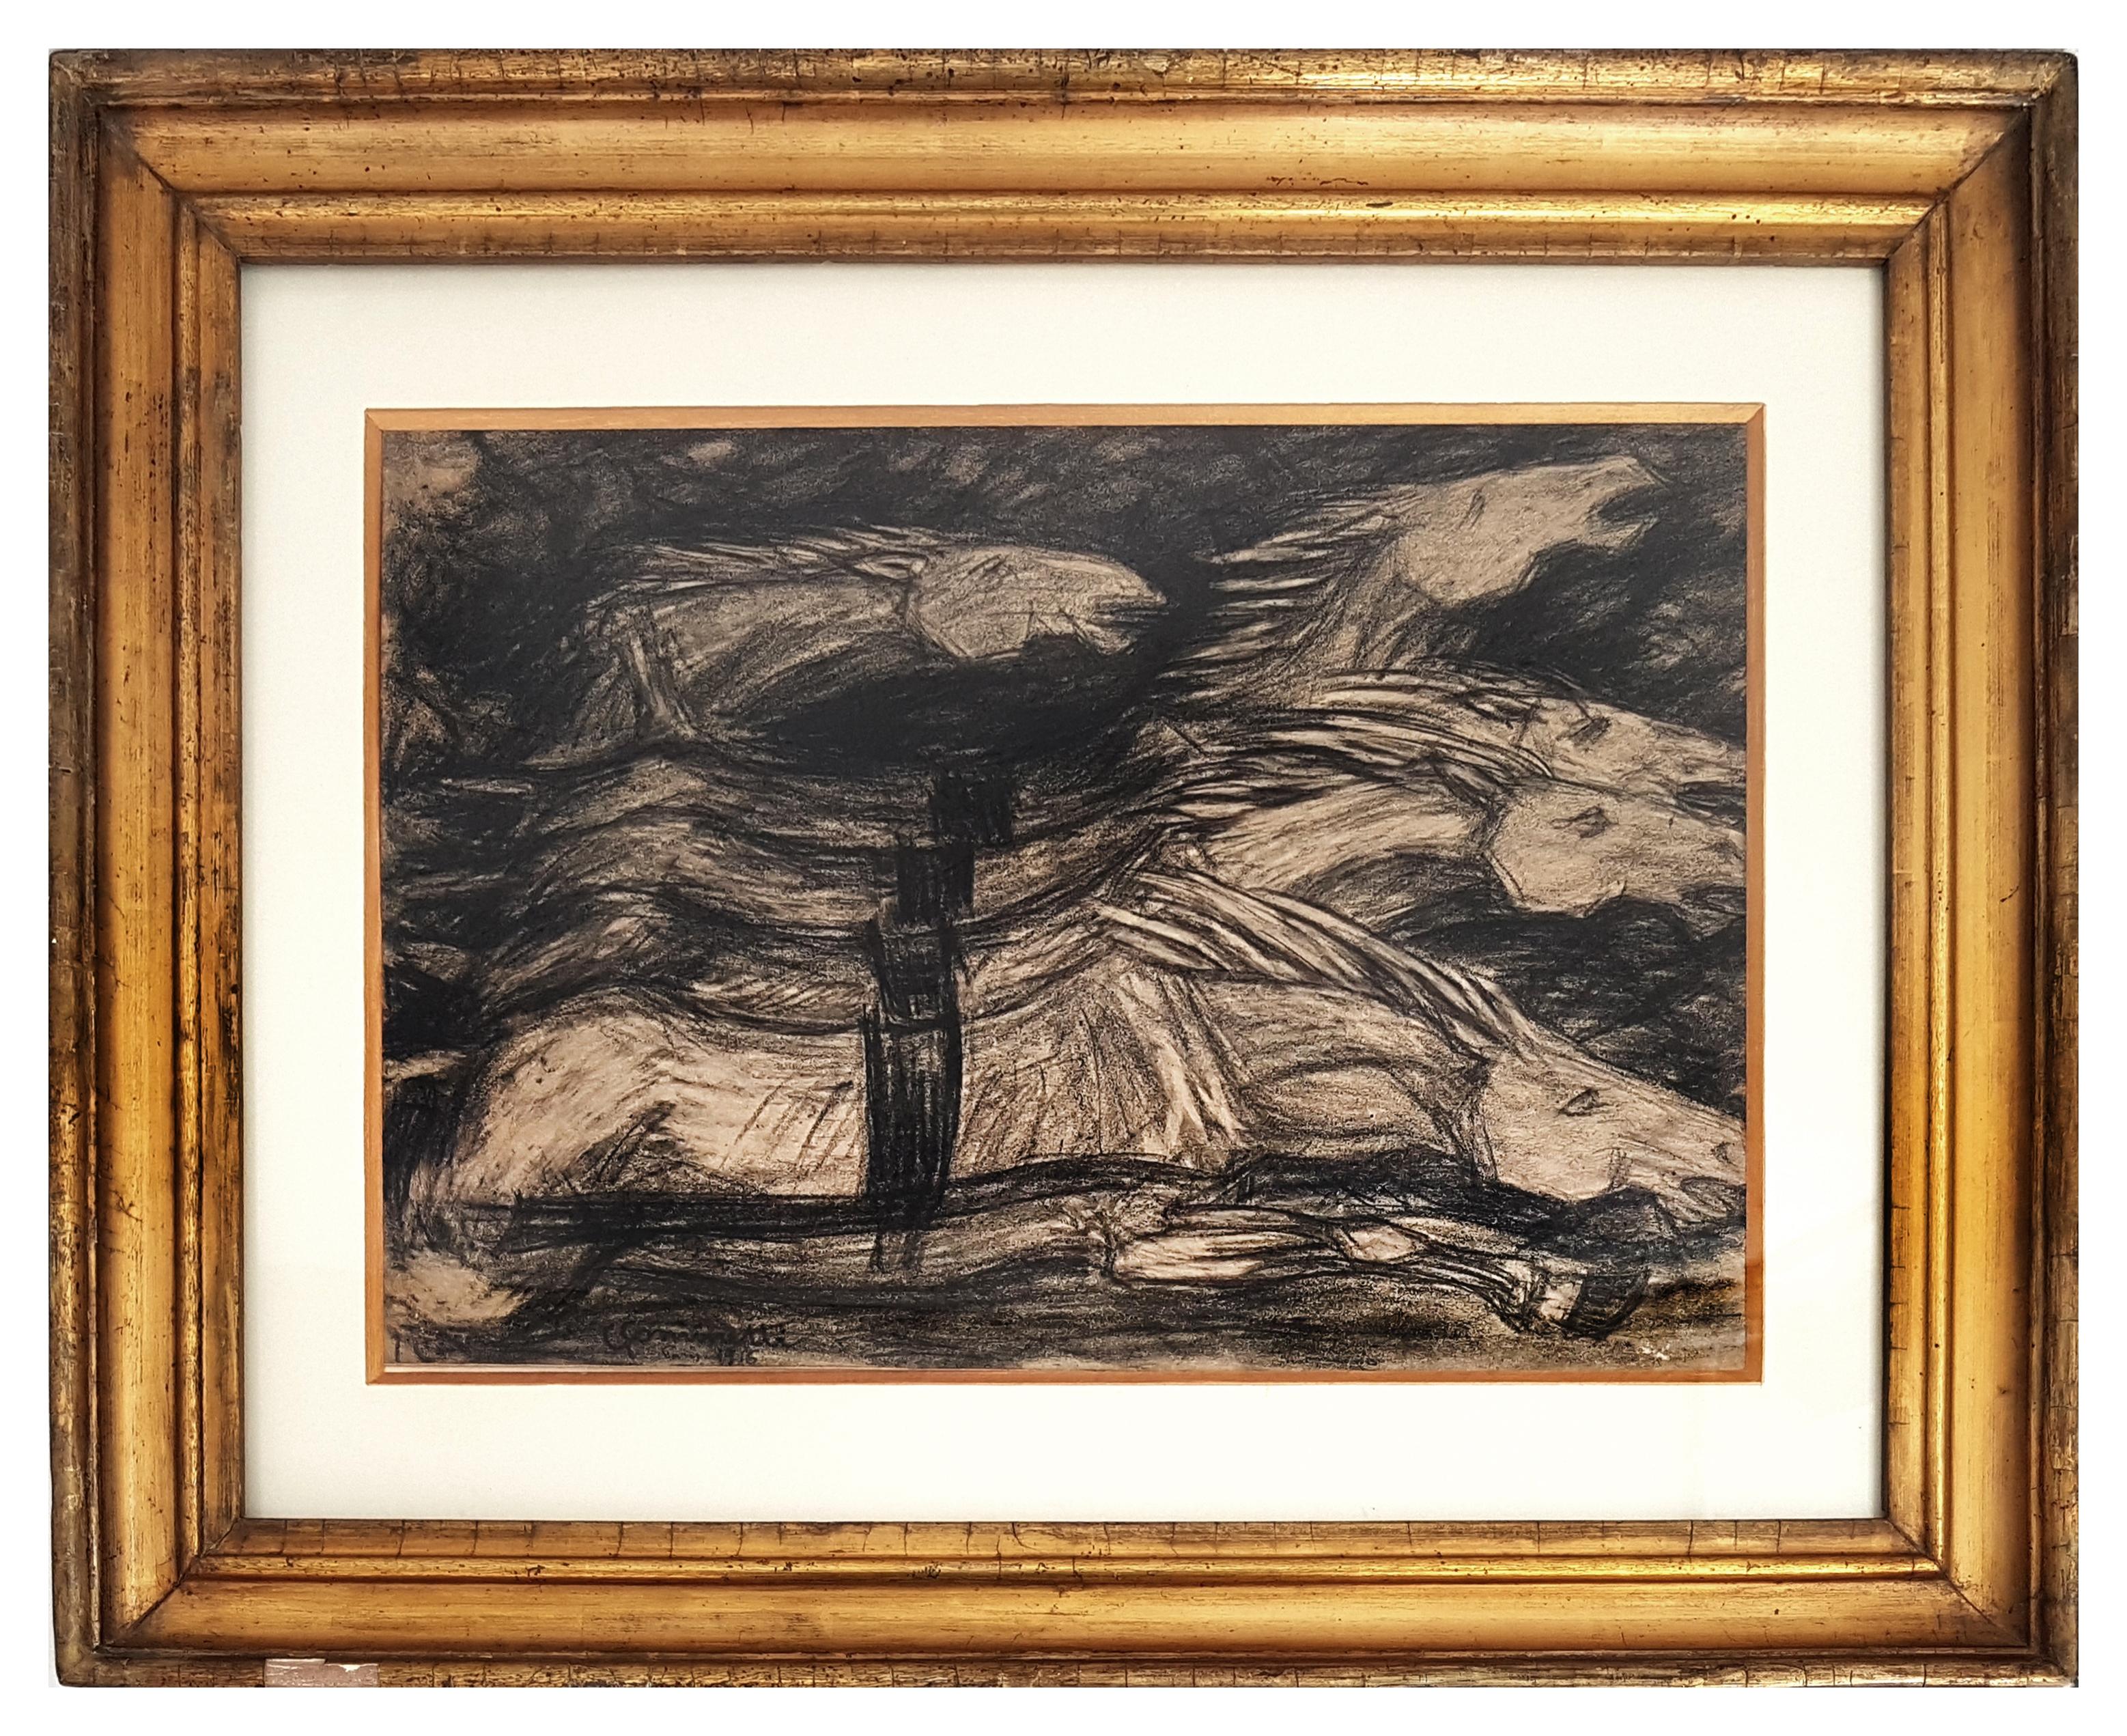 Galloping Horses is a wonderful and original drawing in charcoal on paper, realized by the italian divisions artist Giuseppe Cominetti.
Hand-signed in charcoal and dated on the lower left margin "Paris, 1916". 
This is a very dynamic composition of